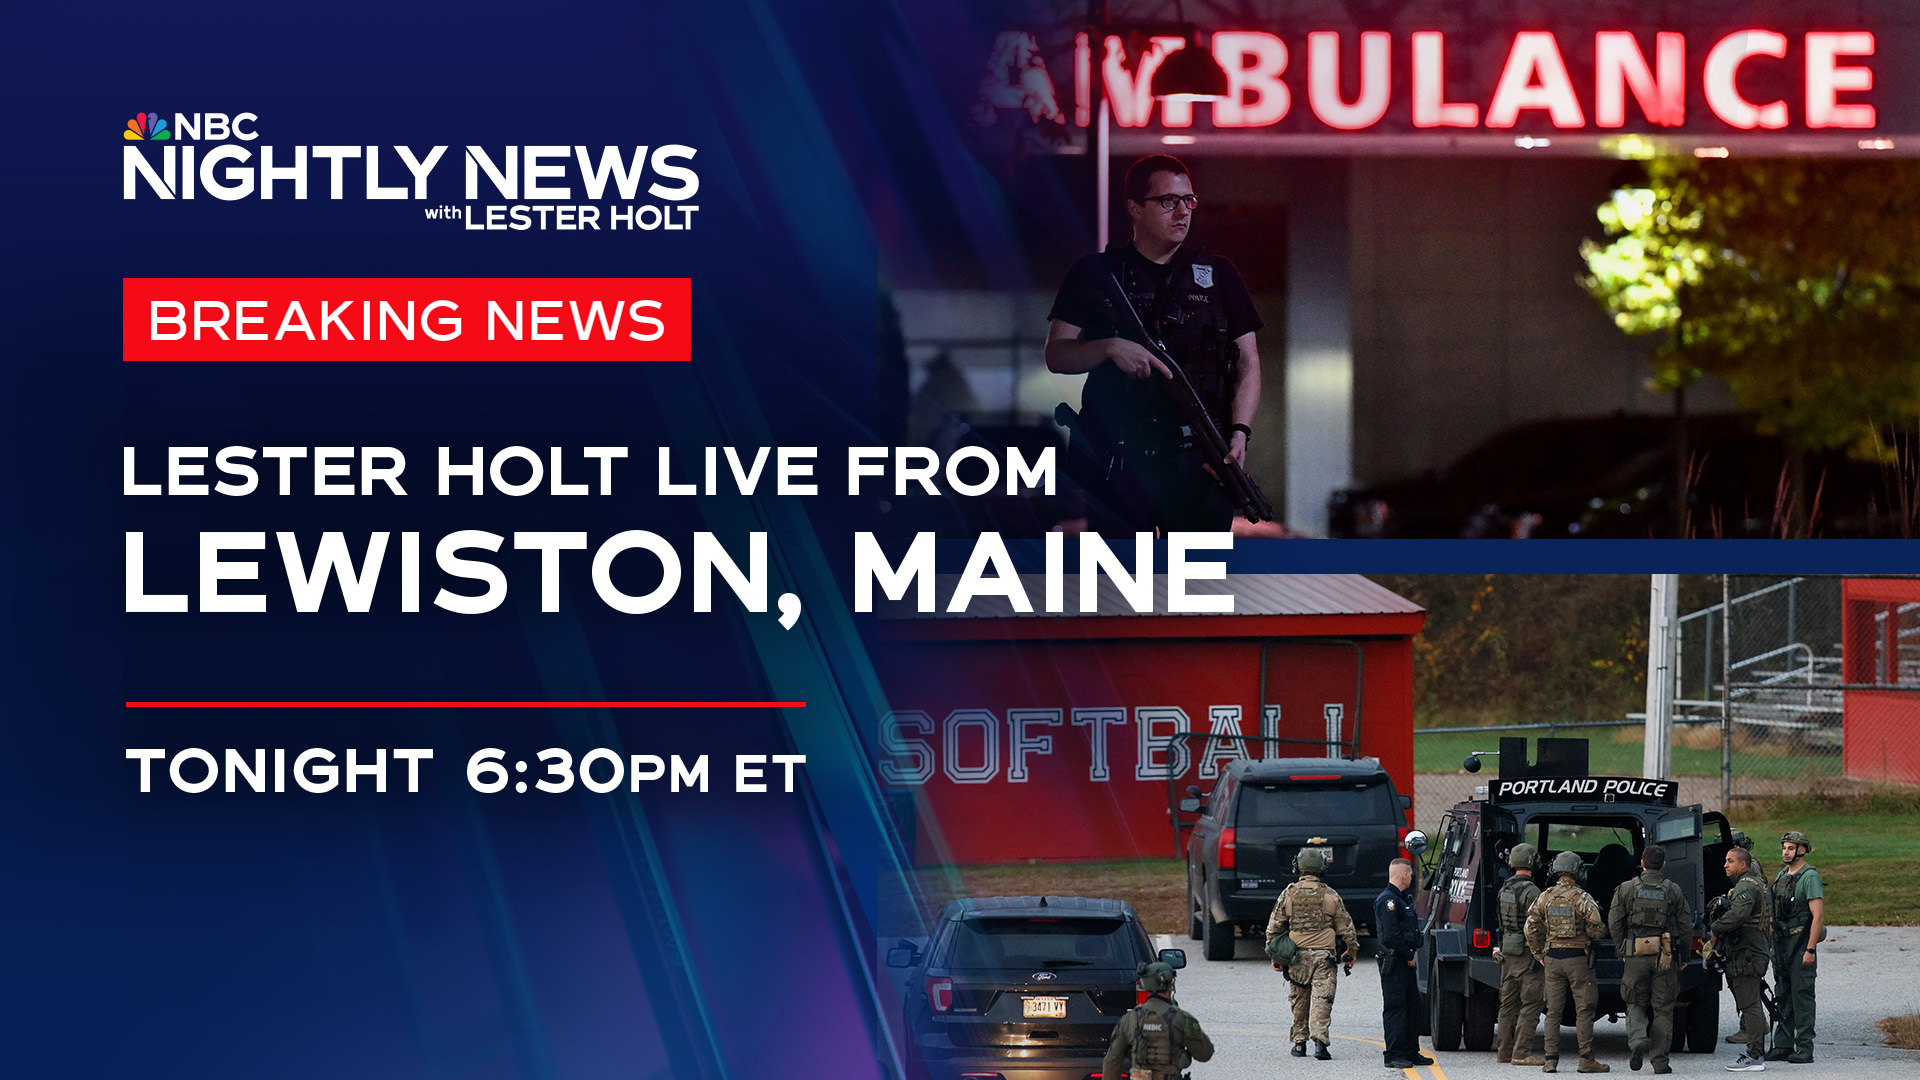 TONIGHT: LESTER HOLT TO ANCHOR NBC NIGHTLY NEWS LIVE FROM LEWISTON, MAINE